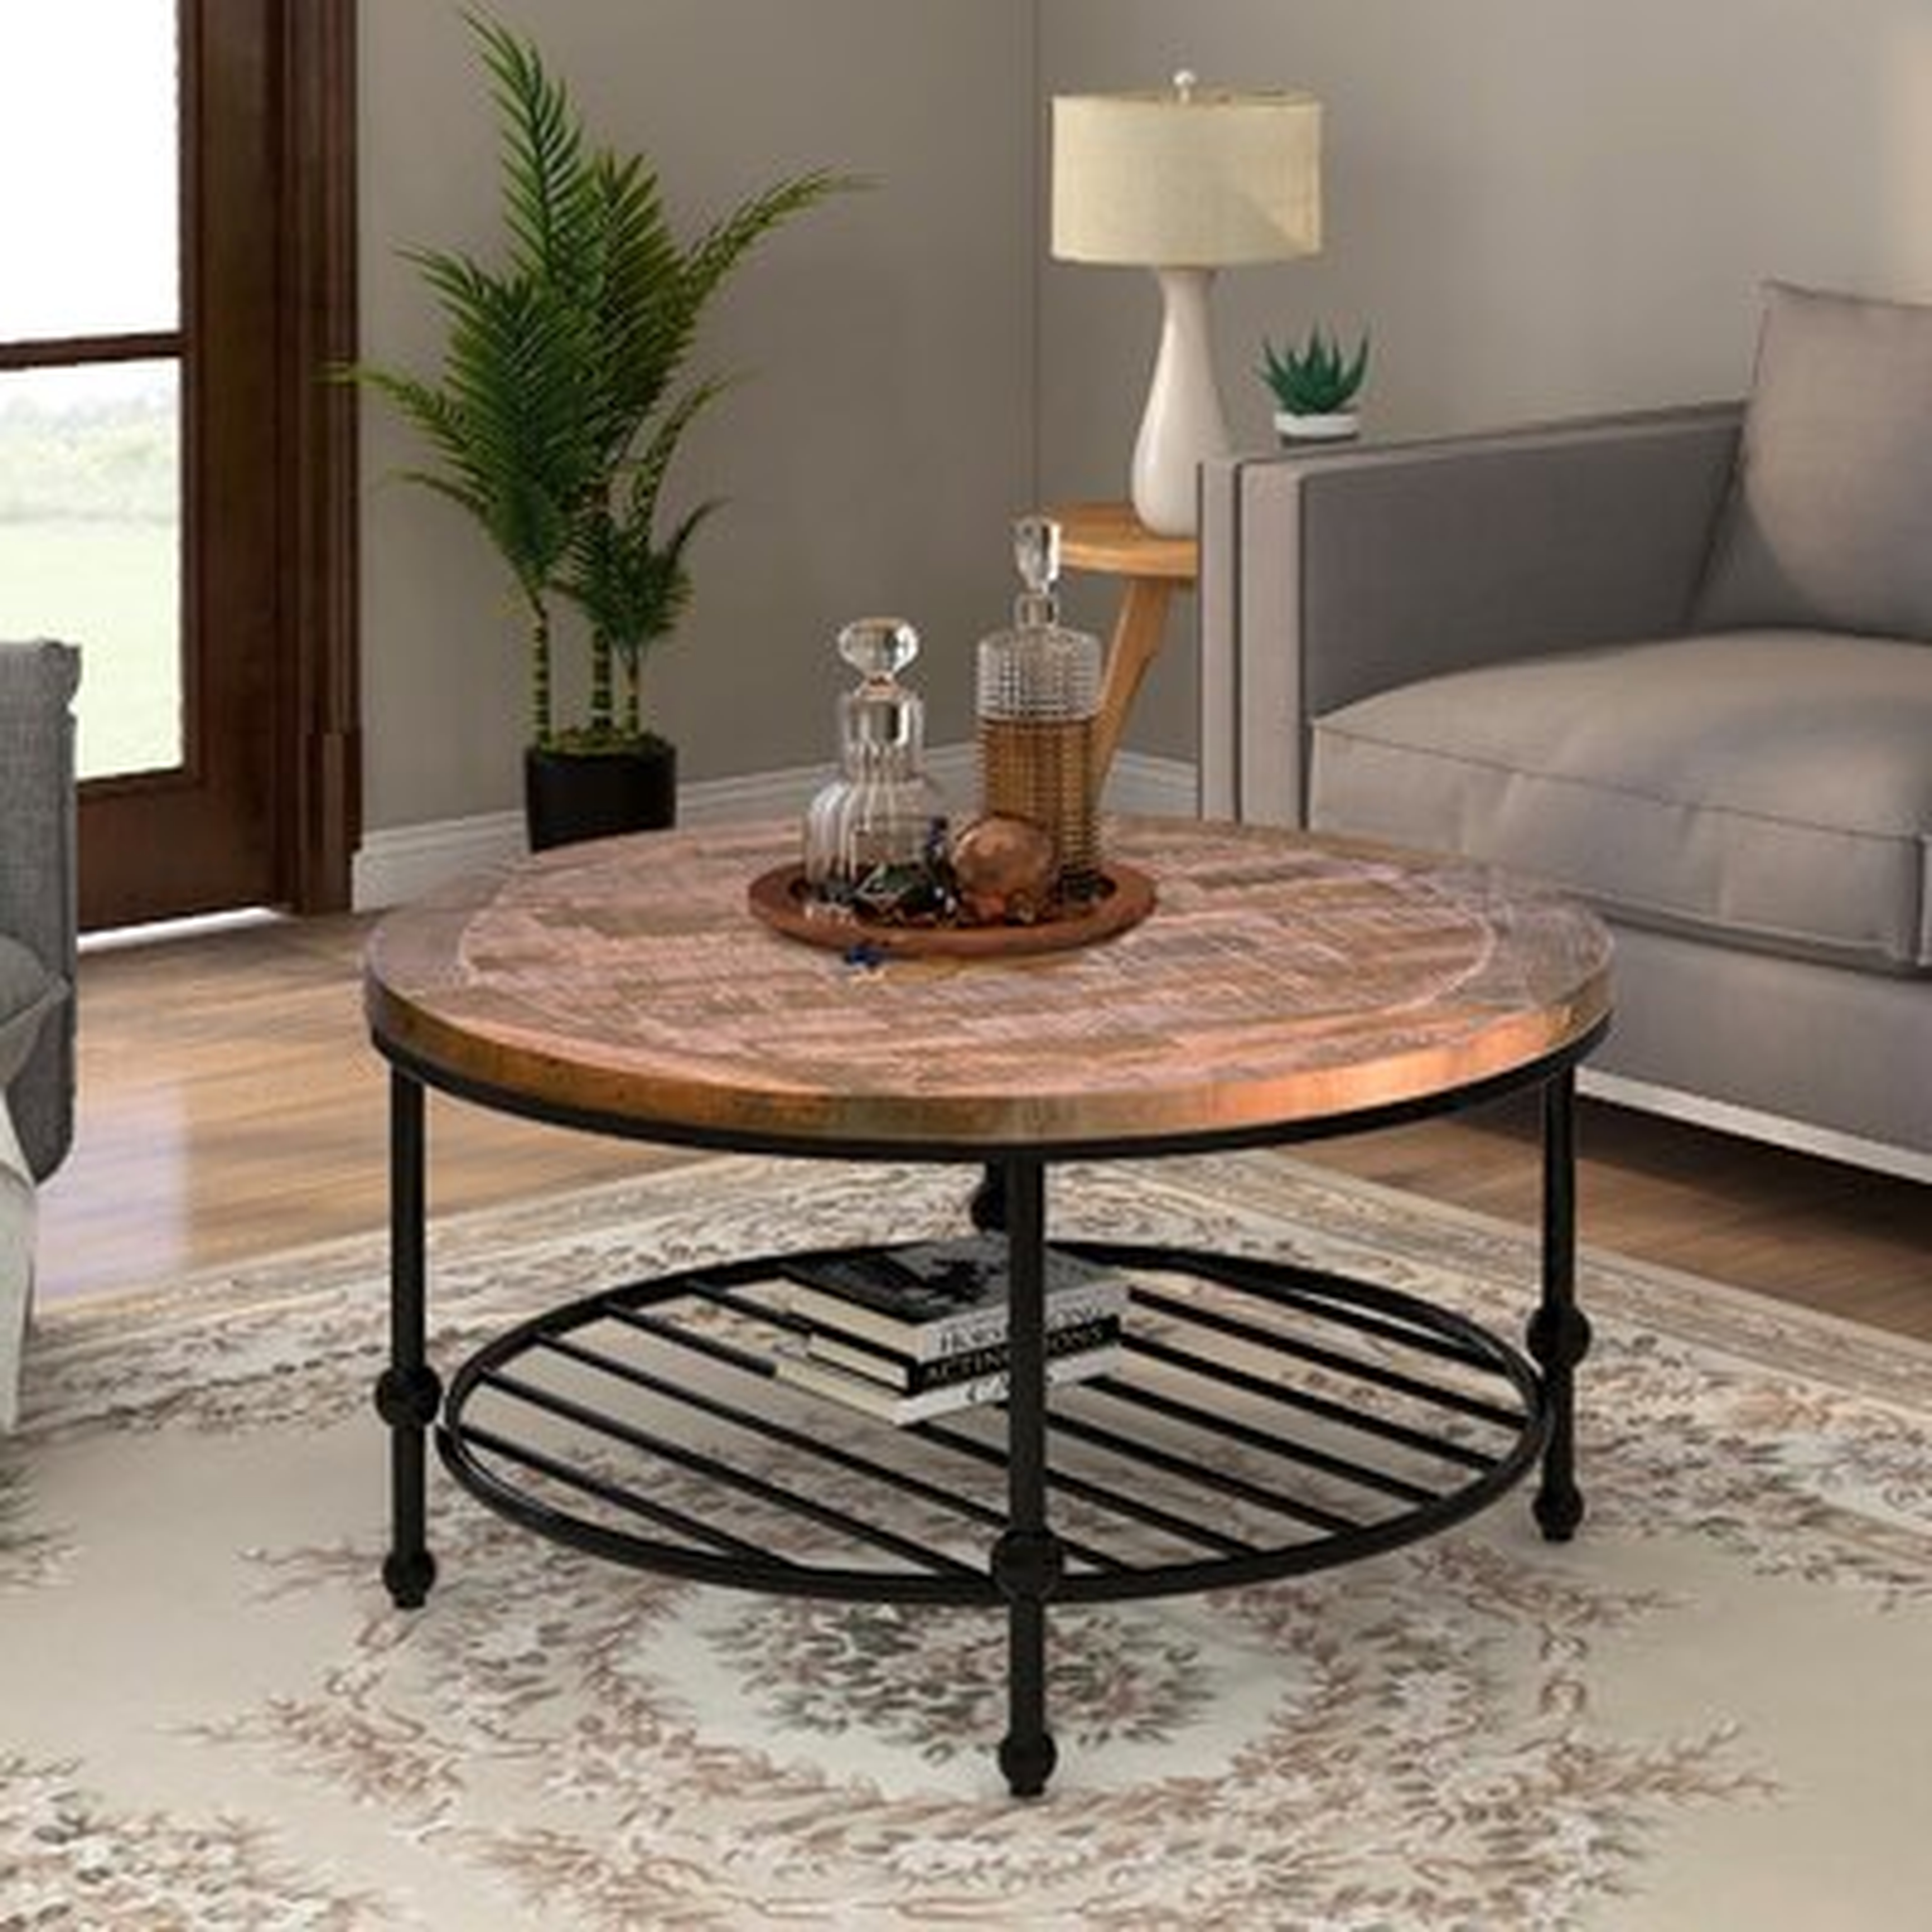 Rustic Natural Round Coffee Table With Storage Shelf For Living Room,round - Wayfair